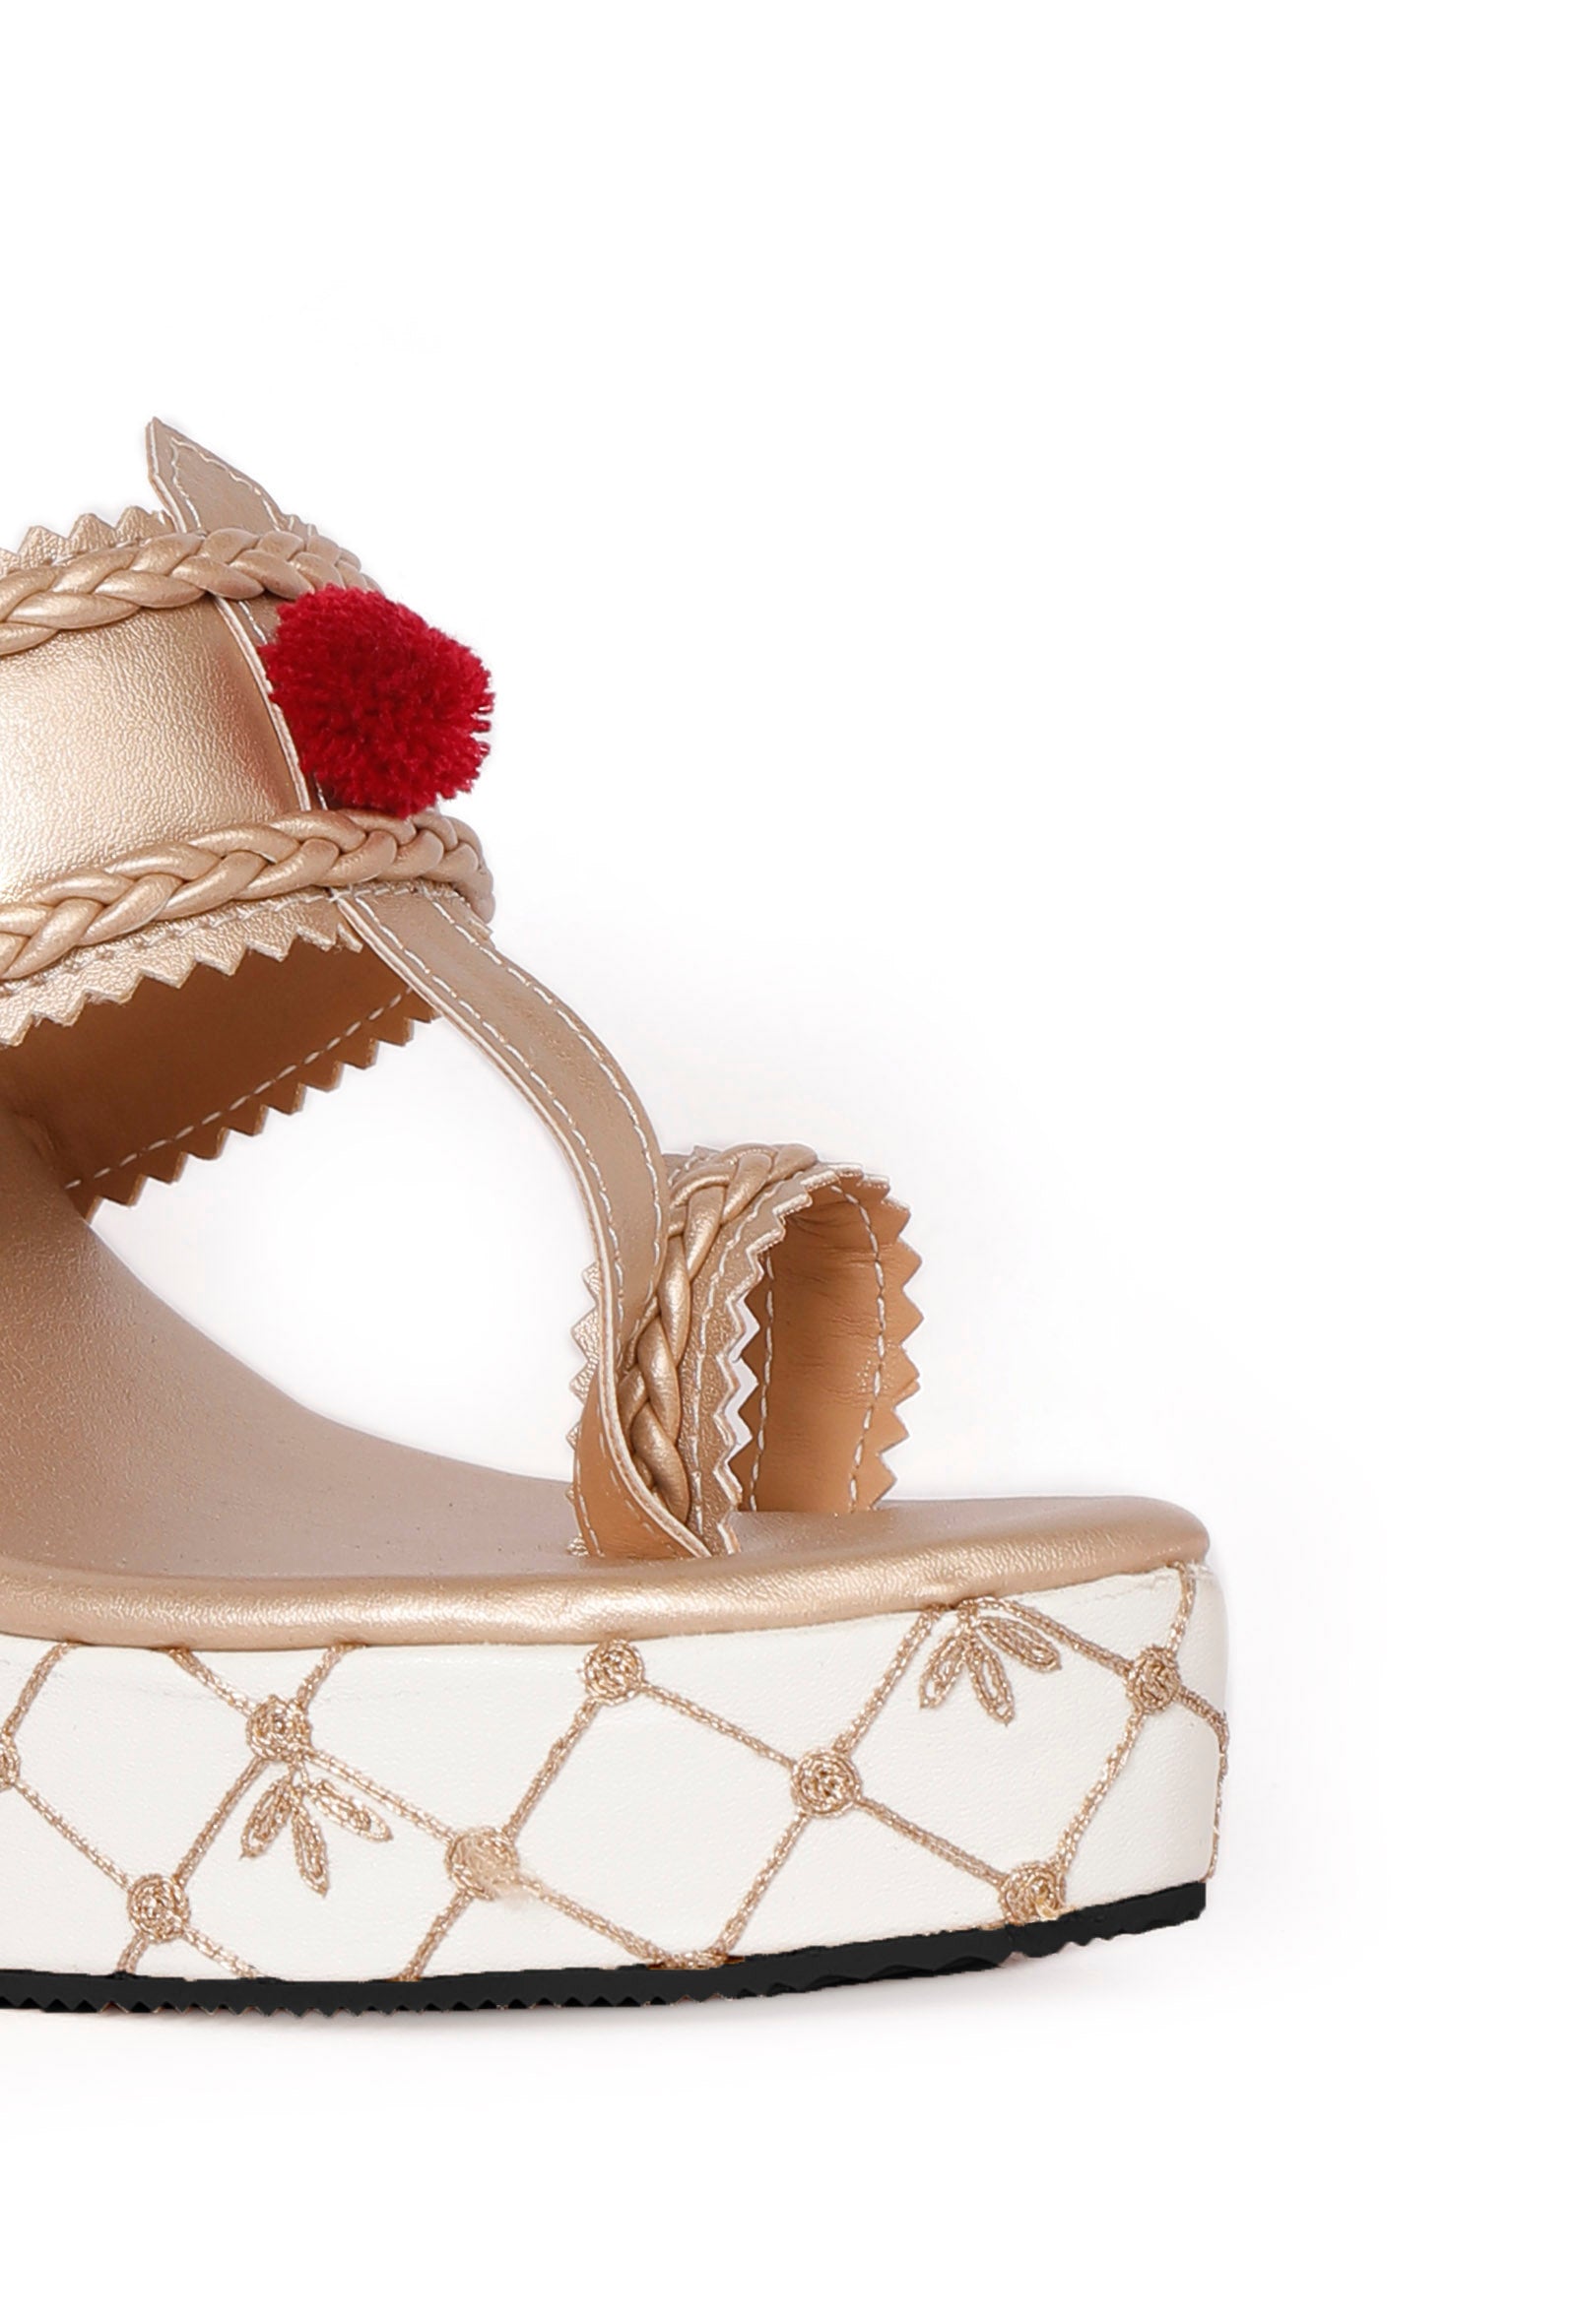 Blingy Gold Hand Embroidered Kolhapuri Inspired Wedges